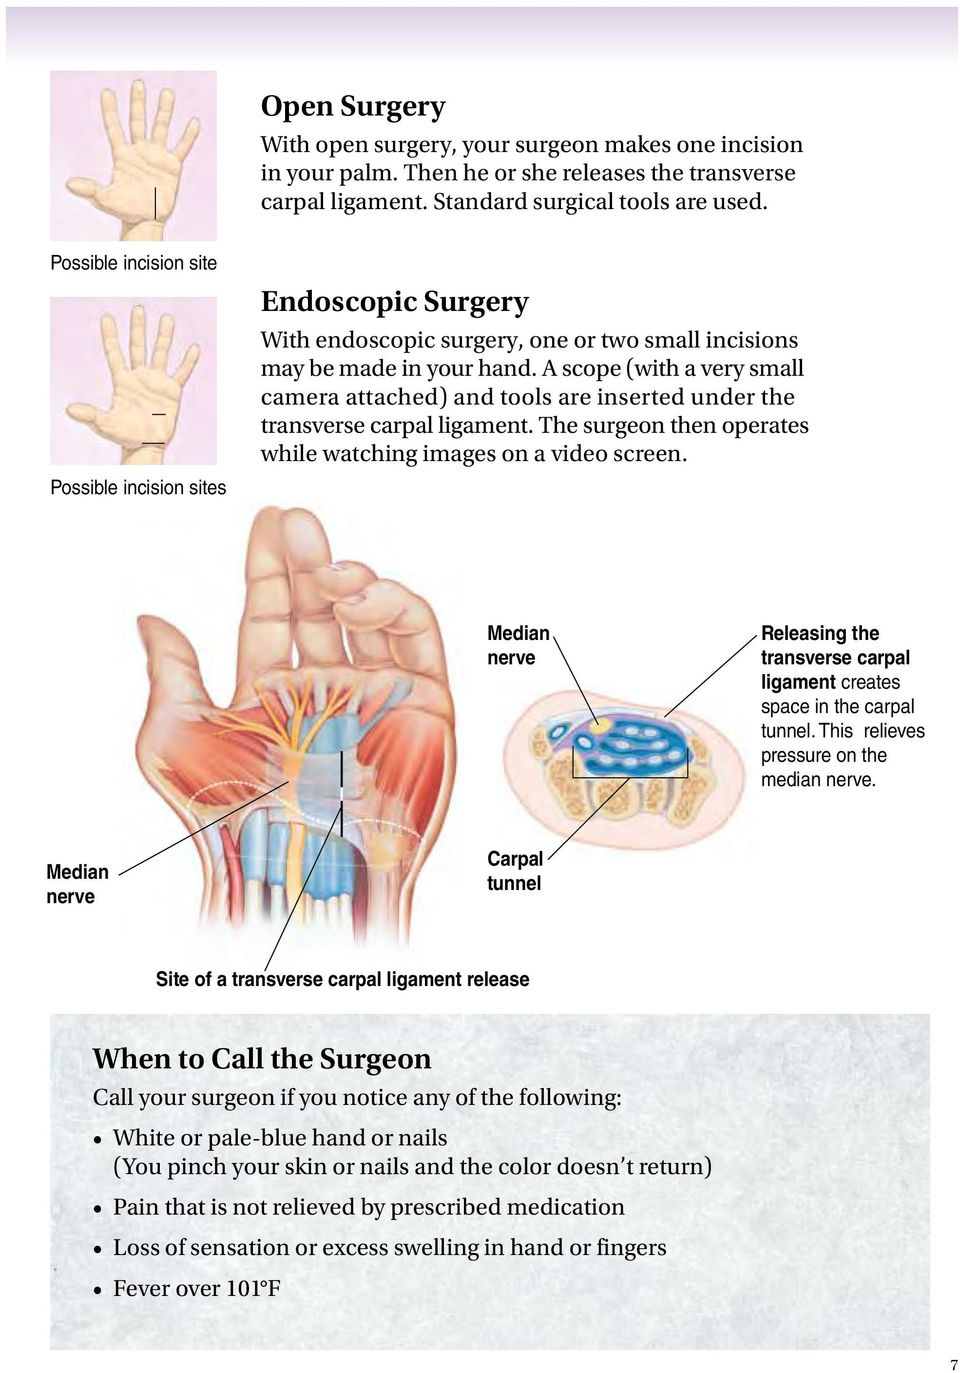 A scope (with a very small camera attached) and tools are inserted under the transverse carpal ligament. The surgeon then operates while watching images on a video screen.